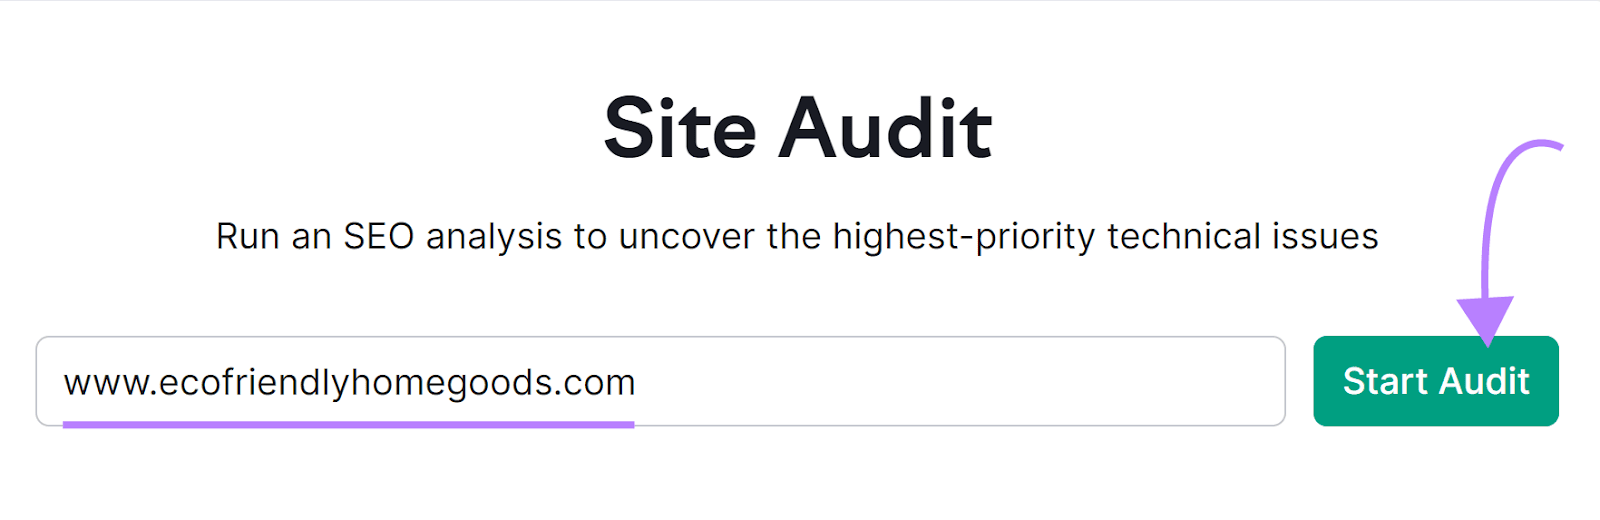 "www.ecofriendlyhomegoods.com" domain entered into the Site Audit tool